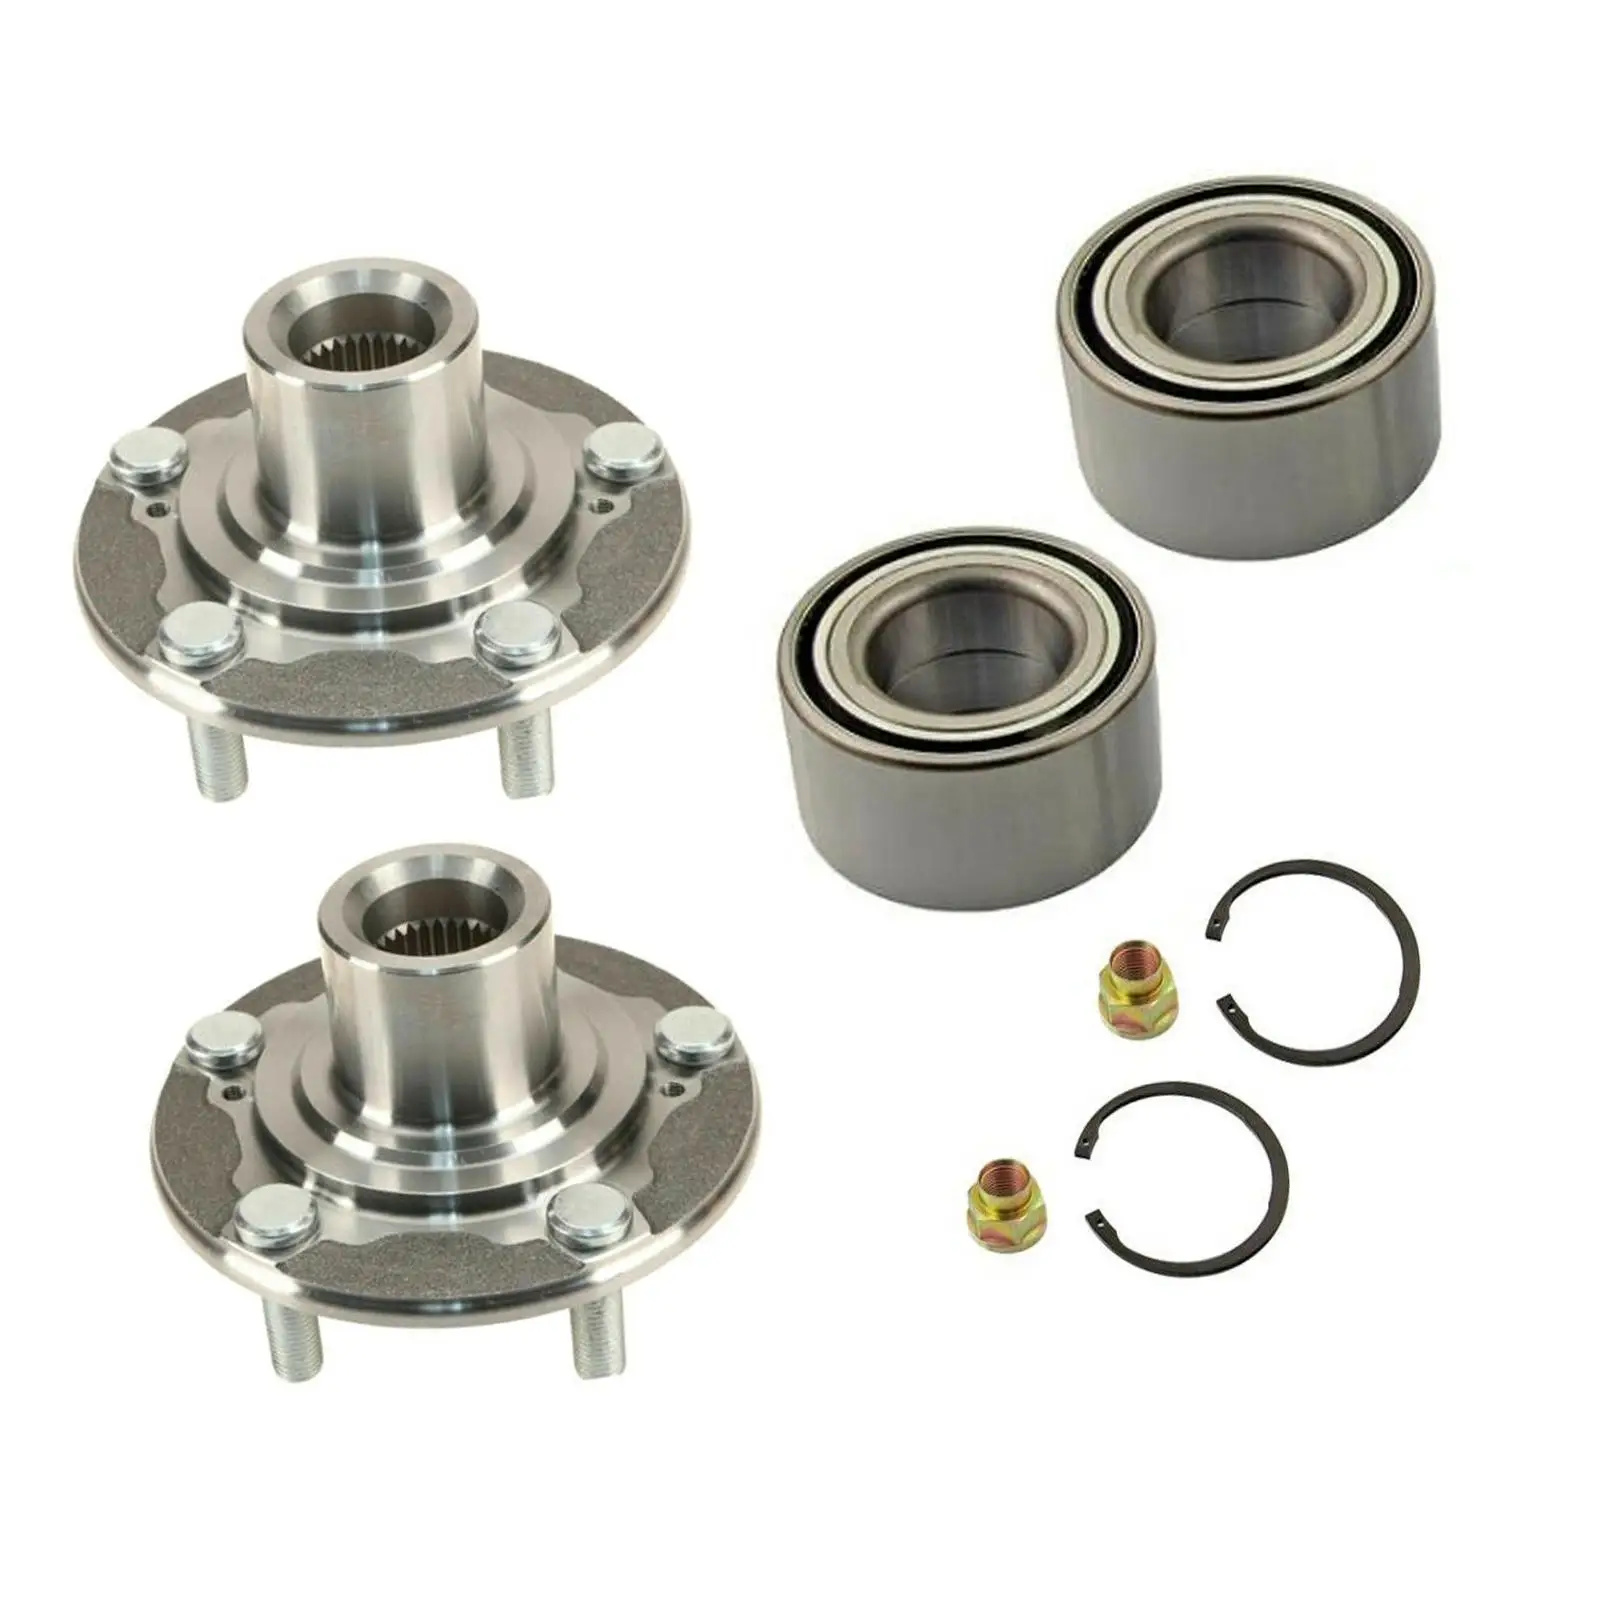 2Pcs Front Wheel Hub Bearing Kits Assembly Professional Replacement Spare Parts Left and Right for Honda Accord 2013-2017